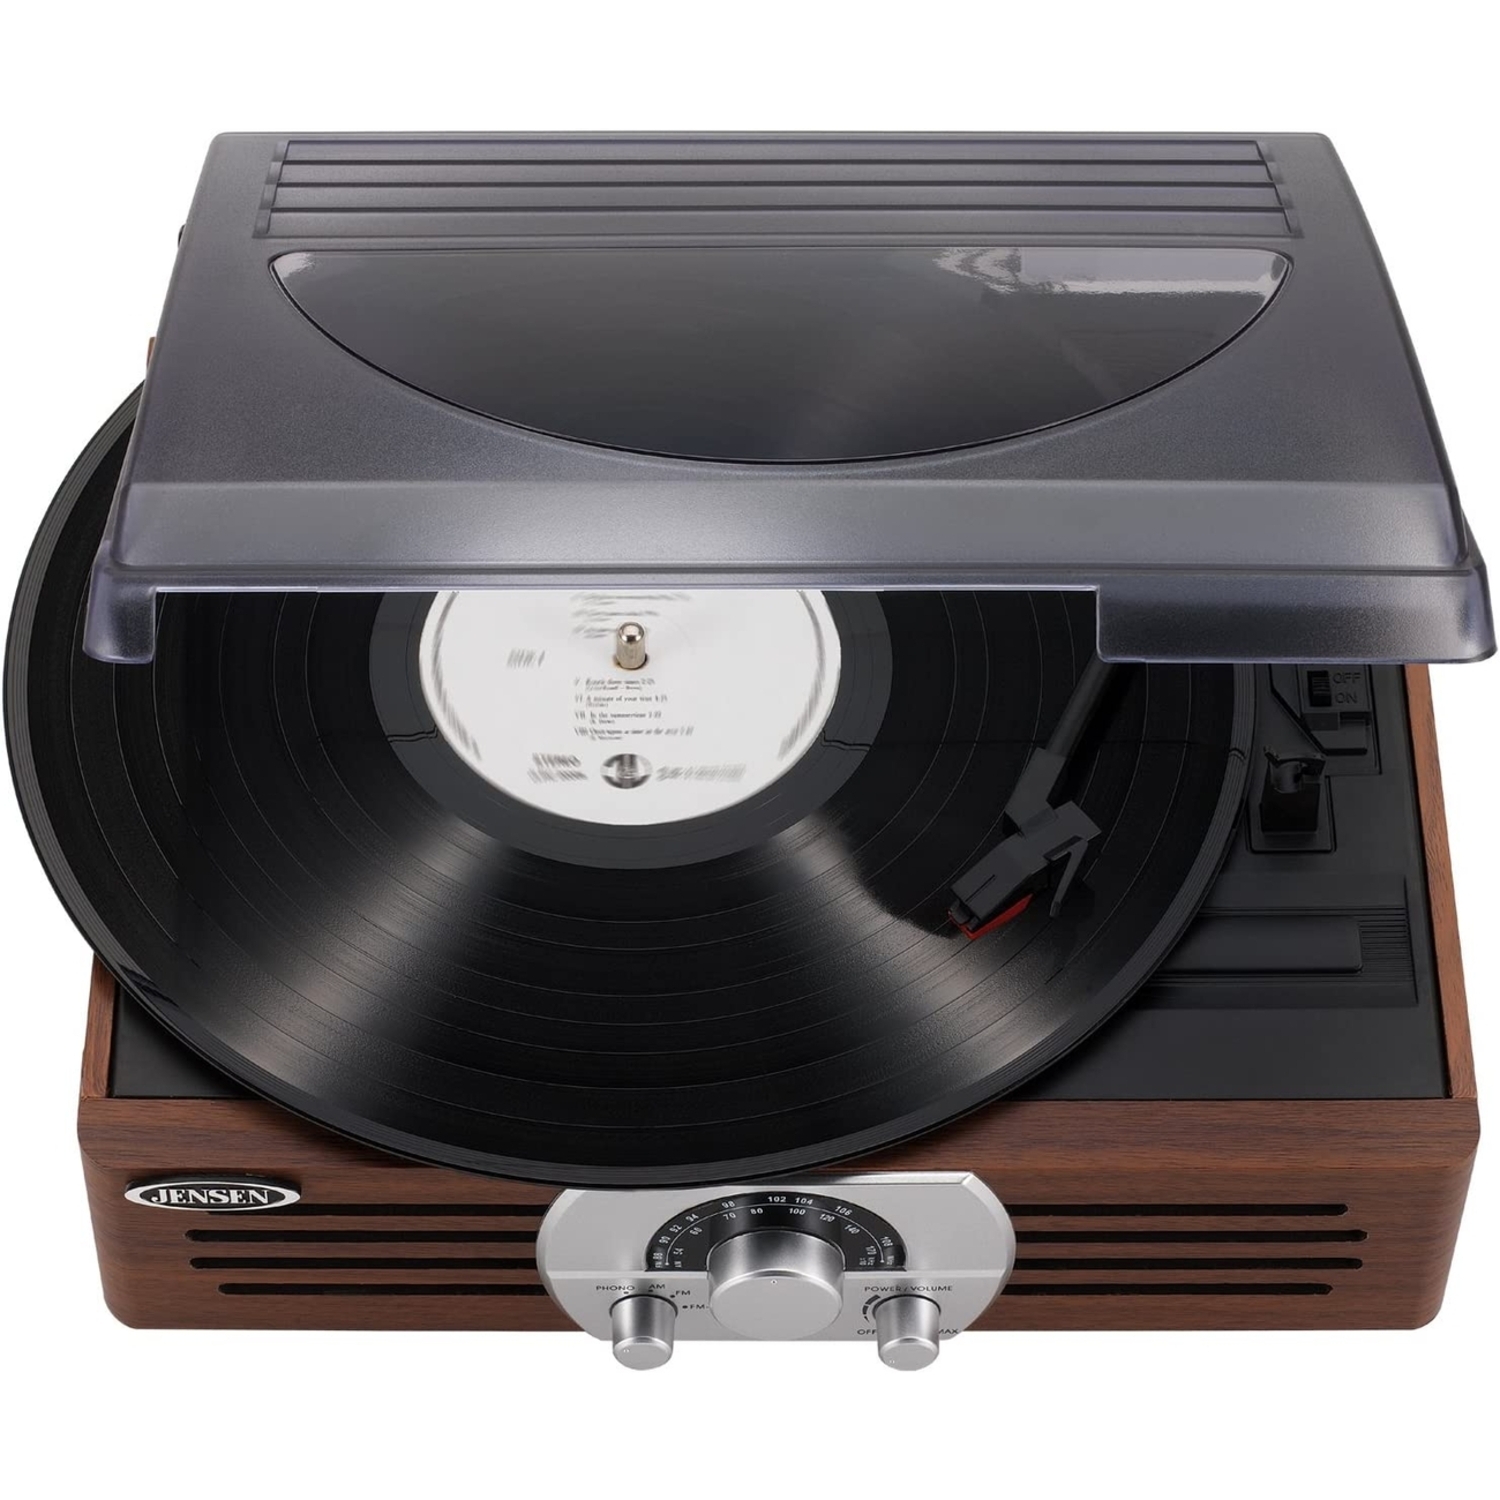 JENSEN JTA-222P Turntable with AM/FM And Pitch Control - image 2 of 6